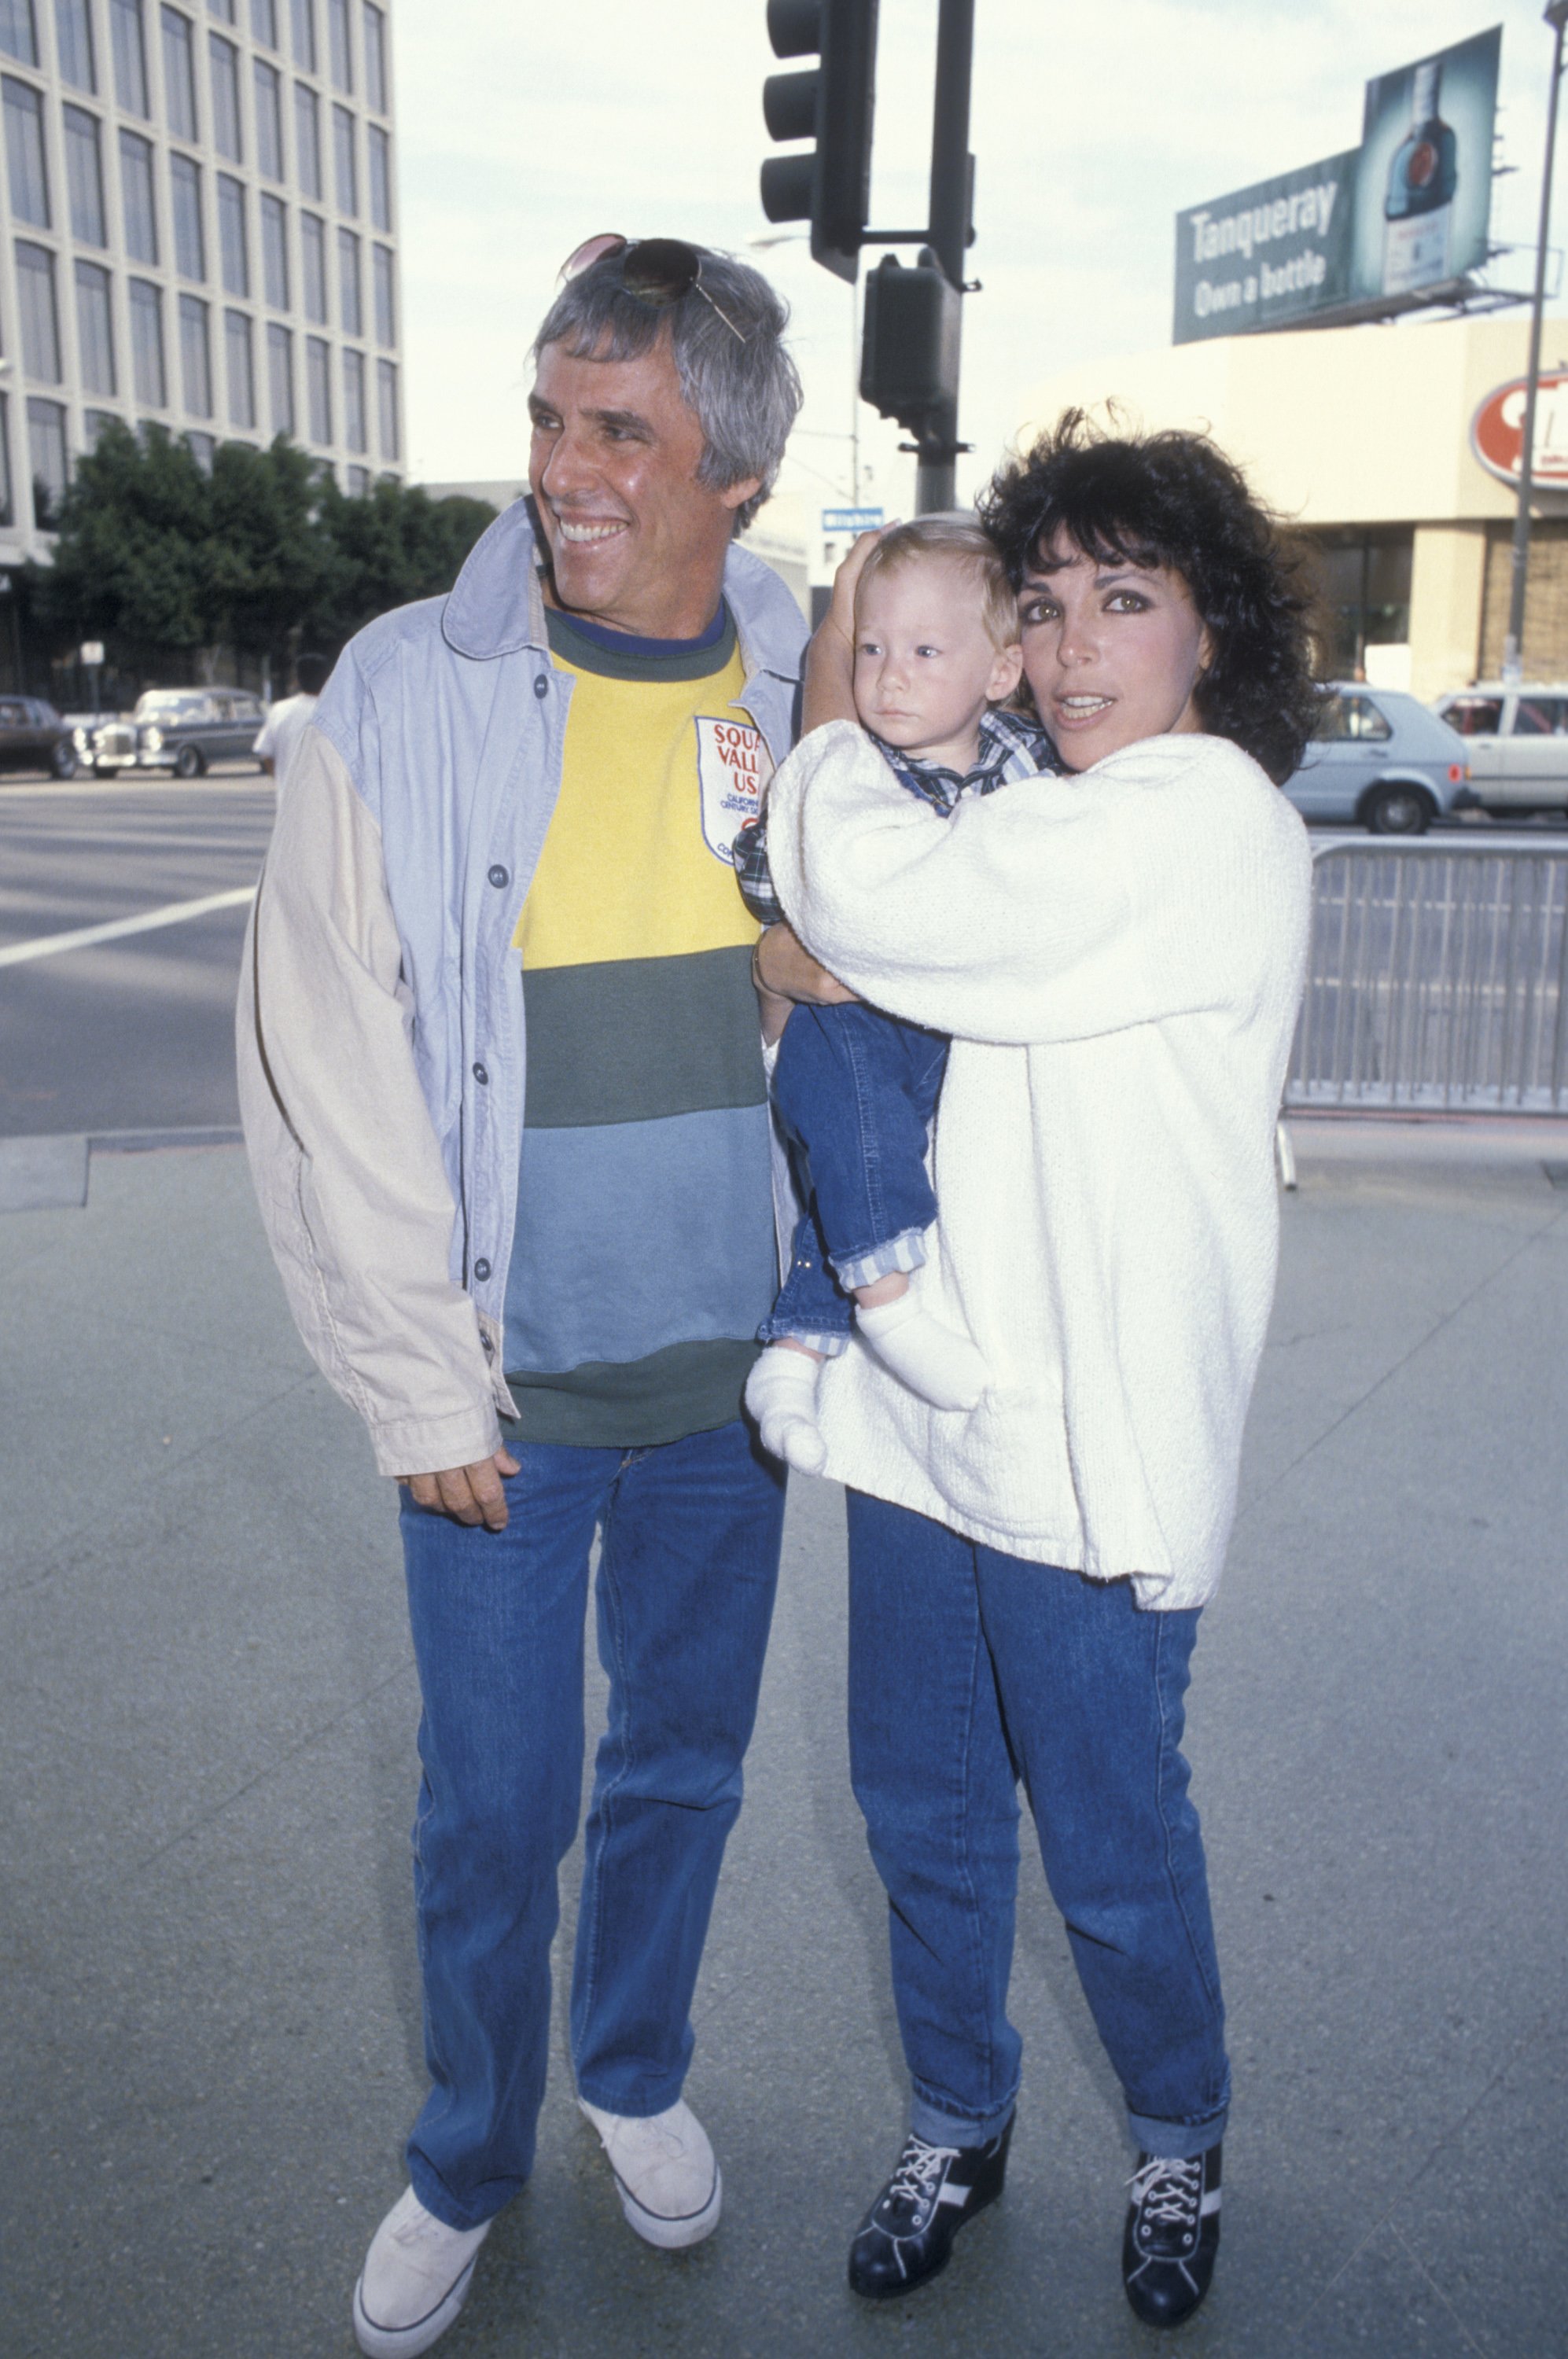 Burt Bacharach, Carole Bayer Sager and their son Christopher Bacharach, on September 20, 1986, at the 2nd Commitment to Life AIDS Project Benefit. | Source: Getty Images